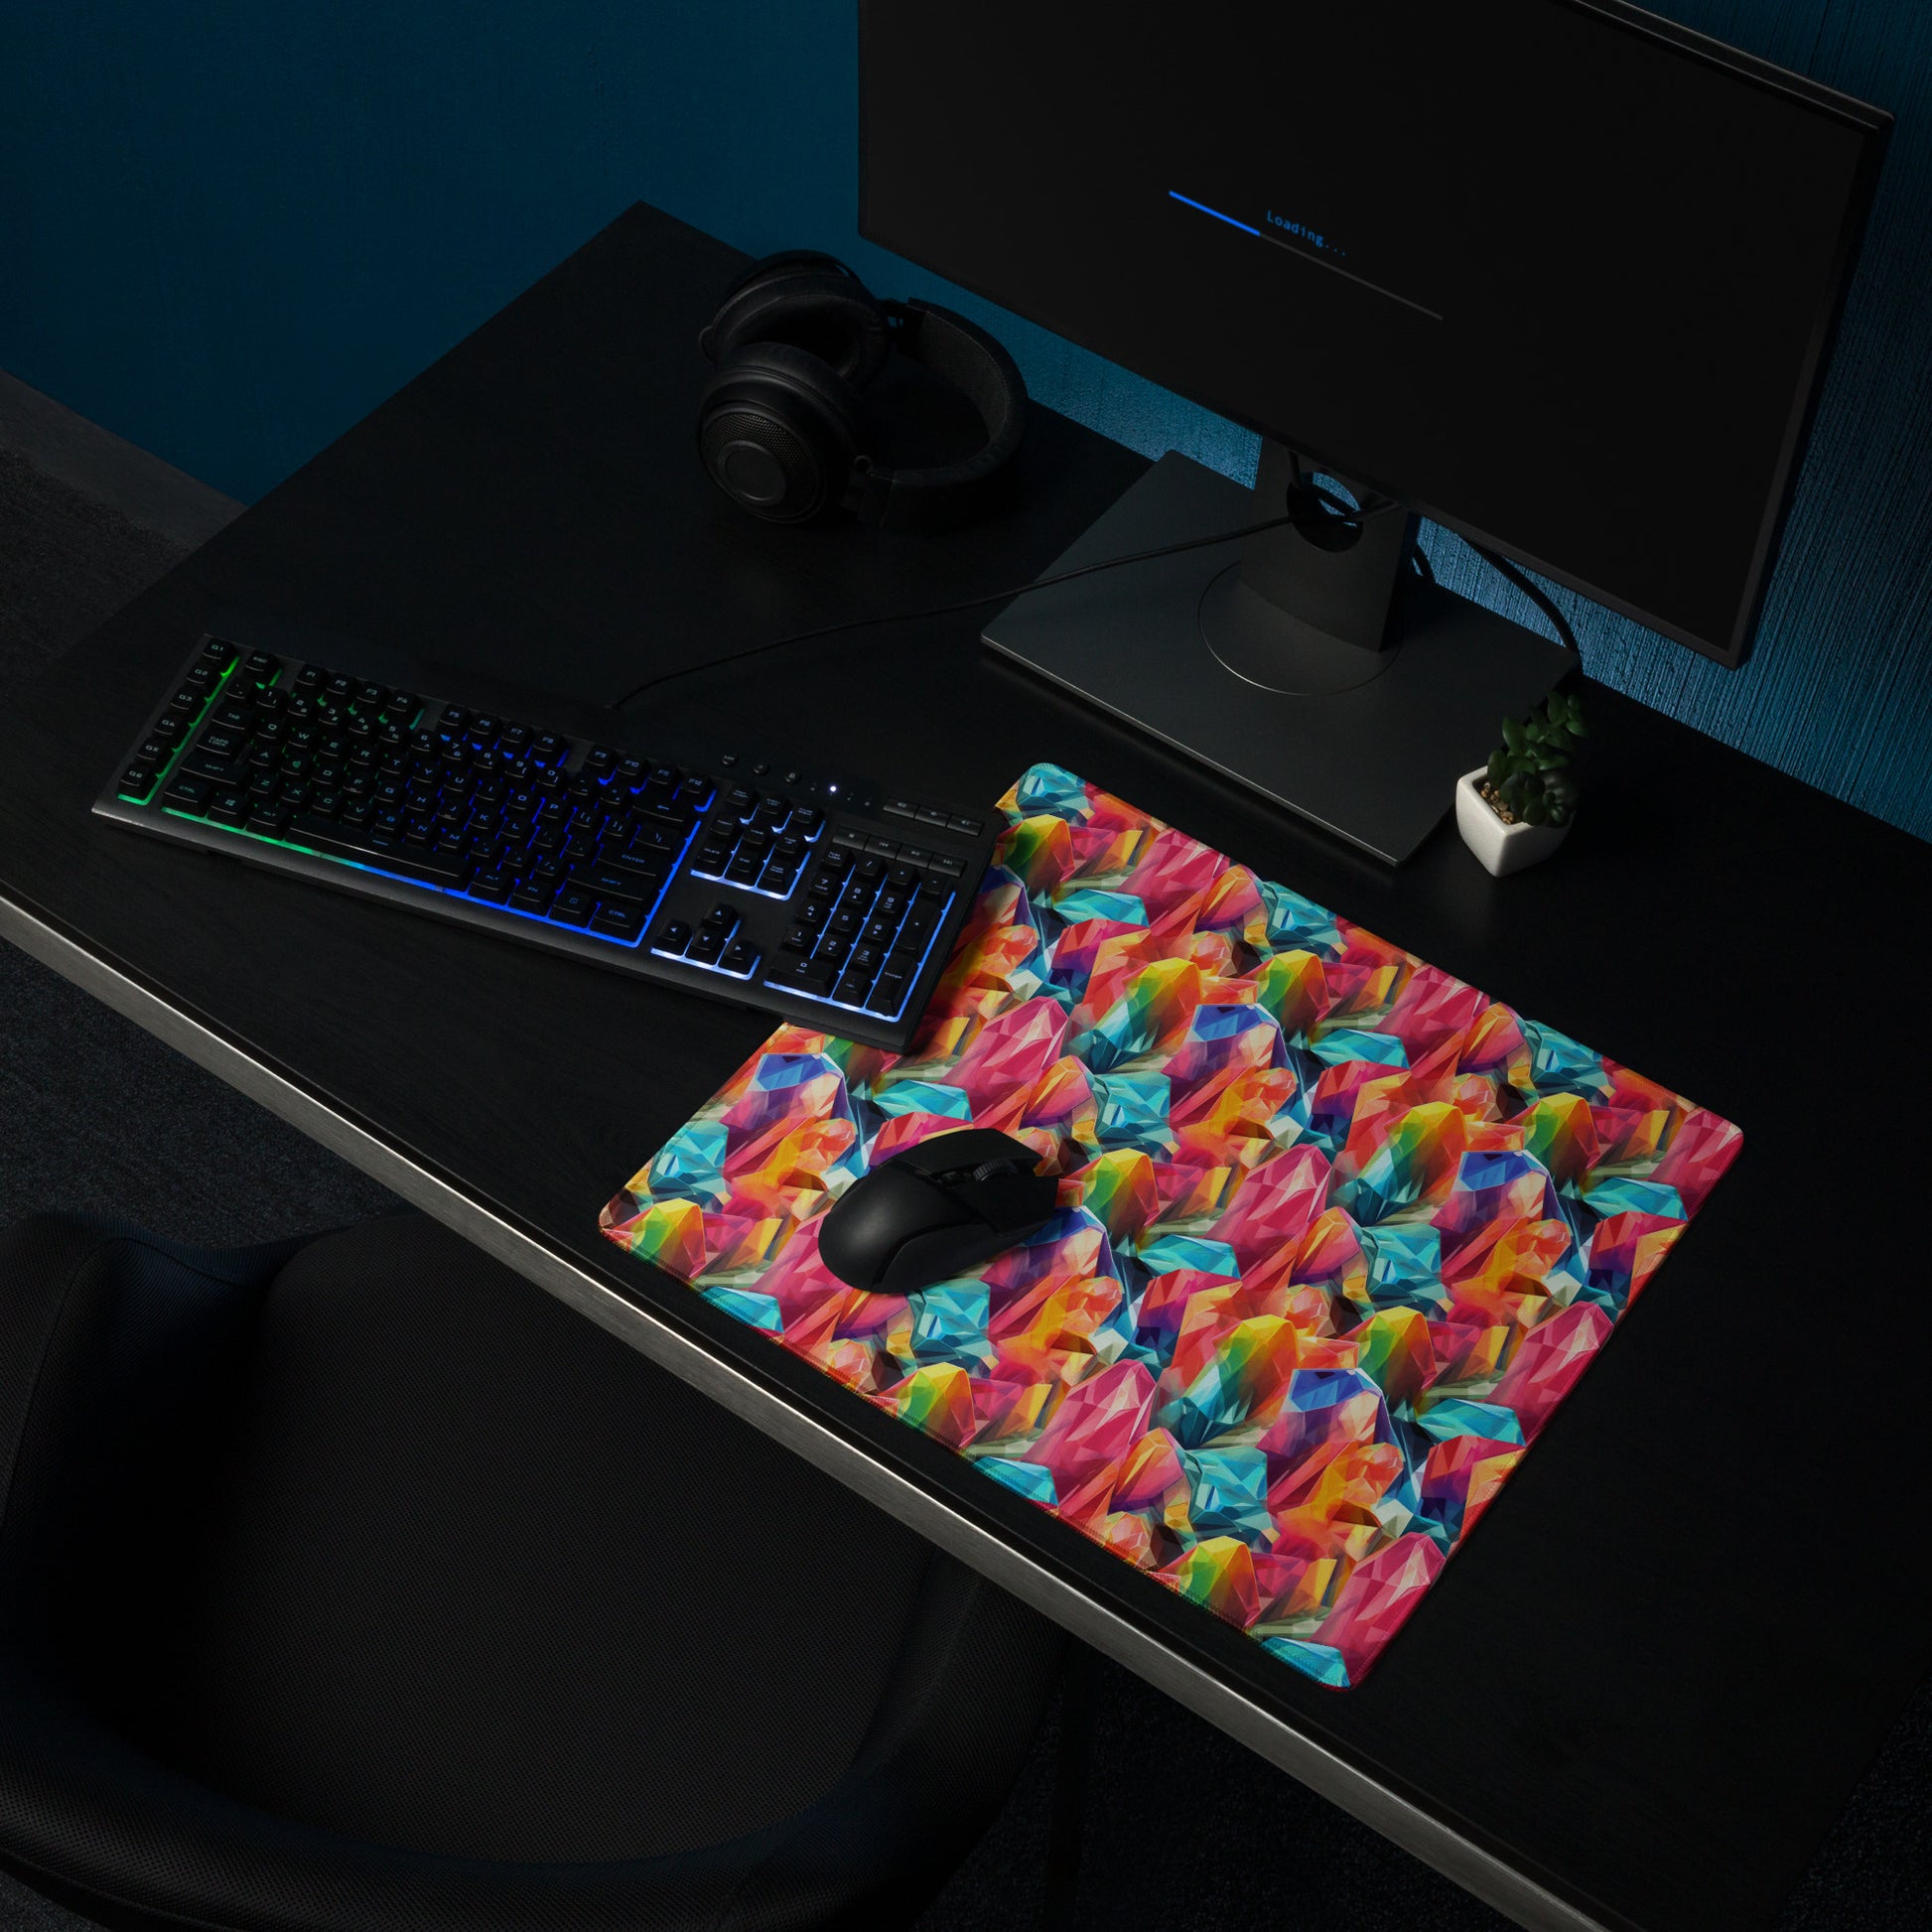 An 18" x 16" gaming desk pad with rainbow crystals. It sits on a black desk with a monitor, keyboard, and mouse.